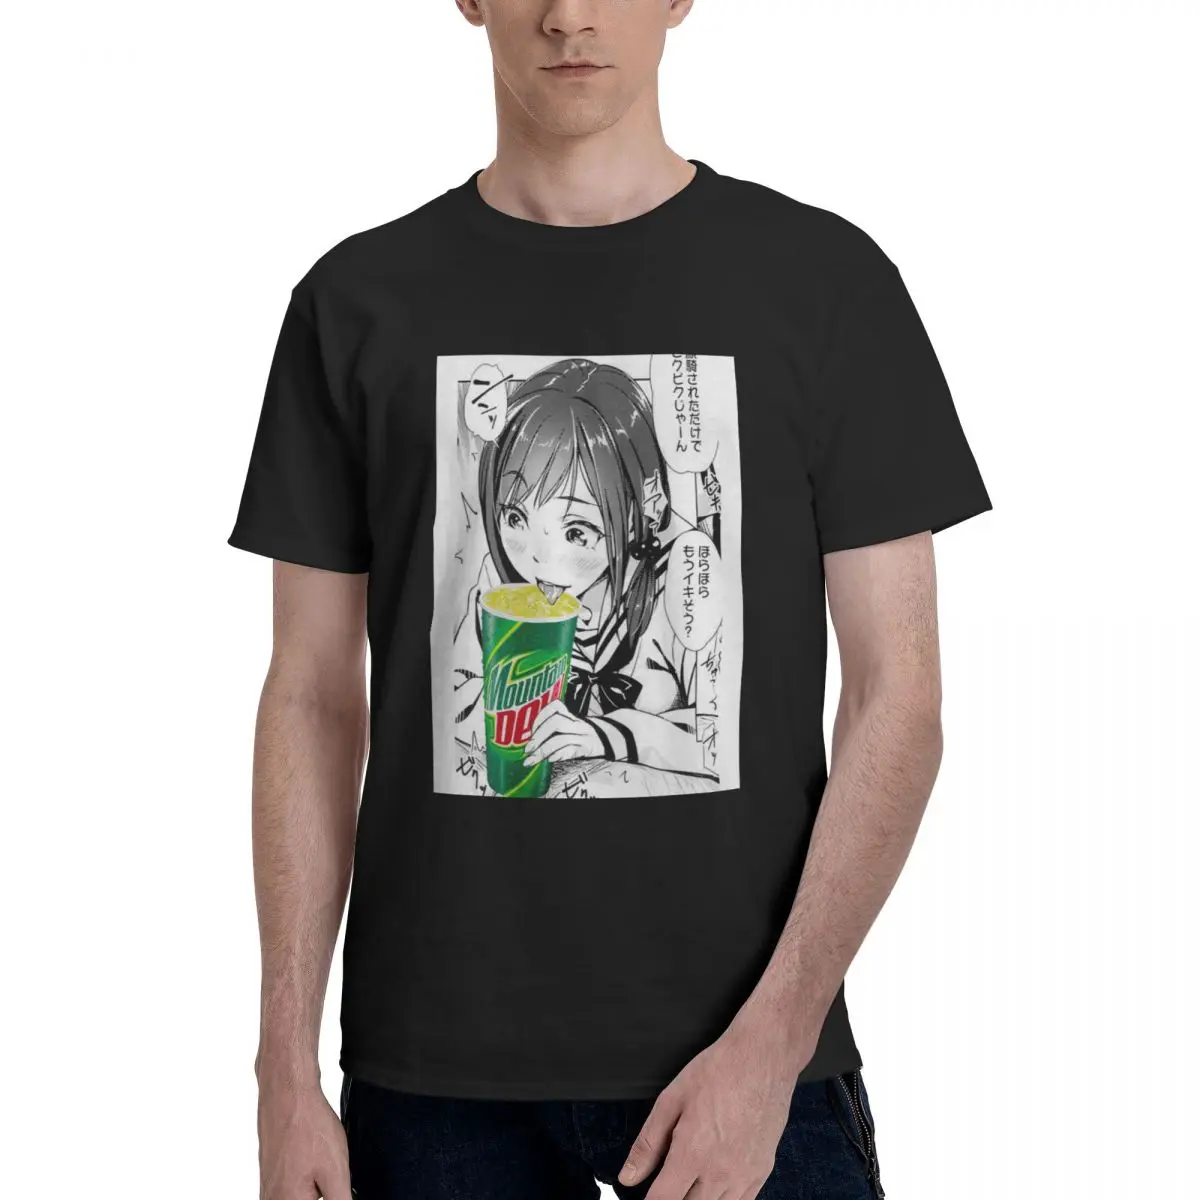 

Stay Hydrated Premium Hentai Ahegao Anime Gift Men's Awesome Tees Short Sleeve Crew Neck T-Shirt 100% Cotton Summer Clothes